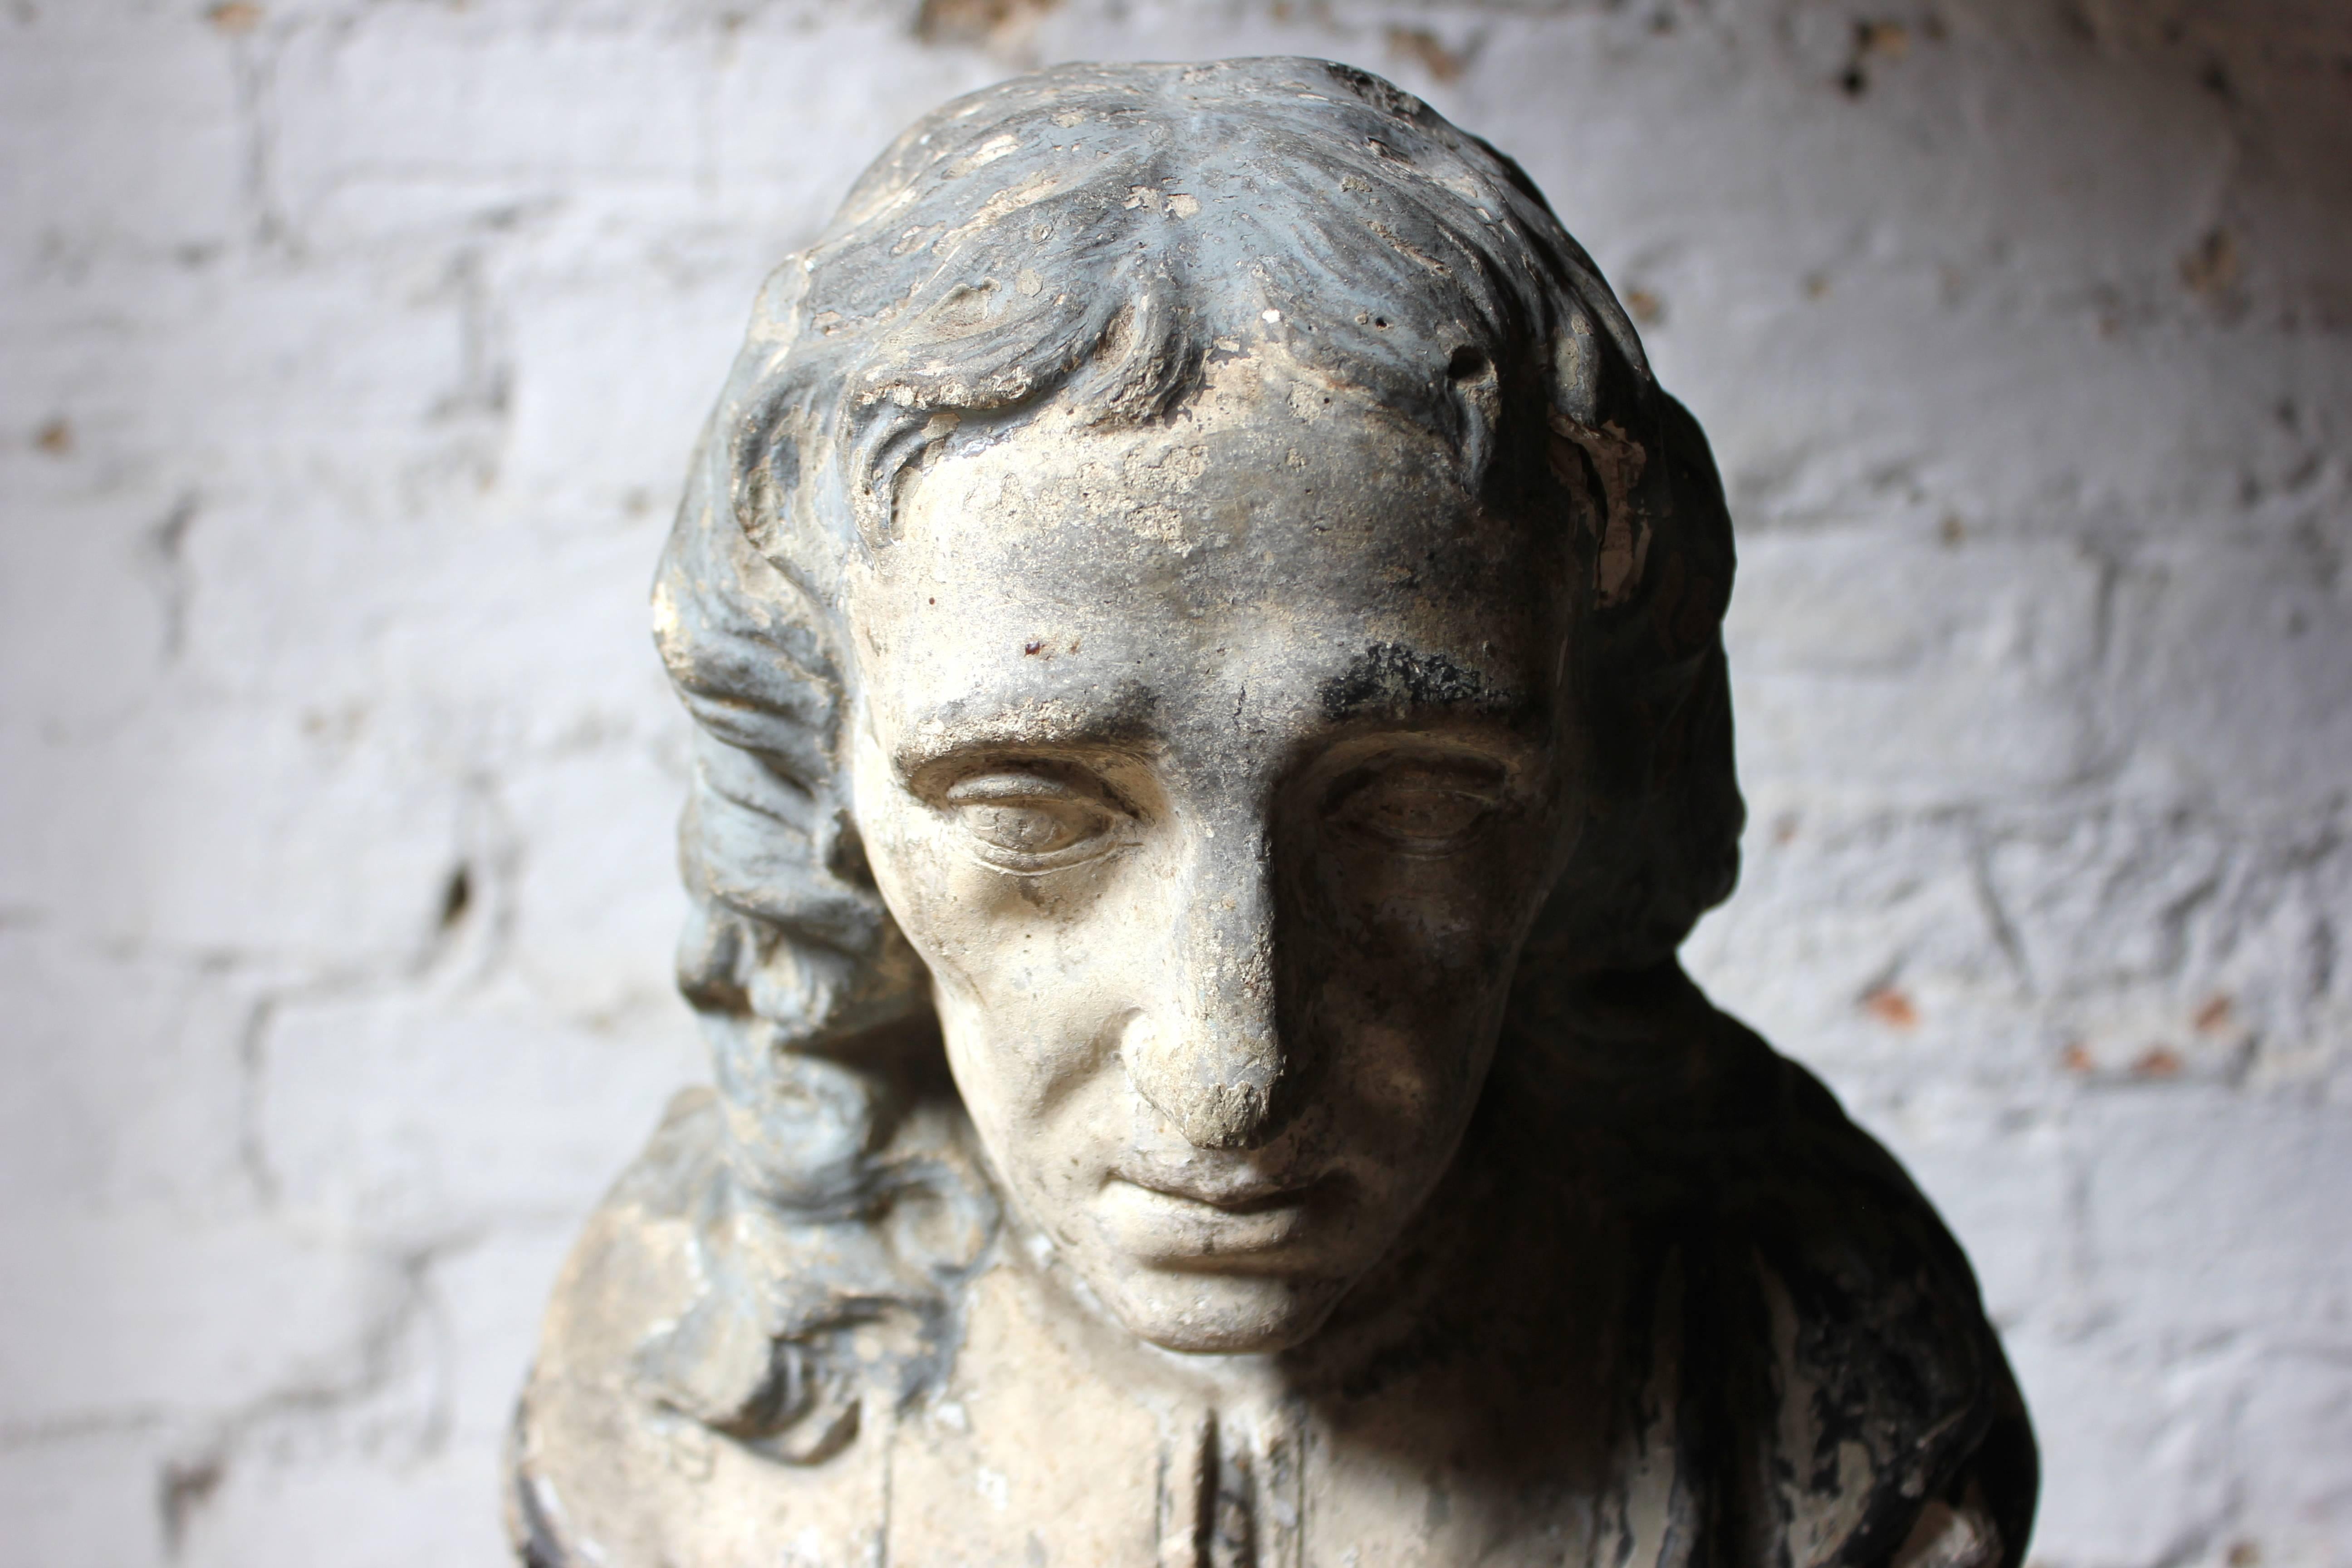 The late Victorian painted plaster library bust of John Milton (1608-74) wearing ceremonial robes and with a central cartouche reading ‘Milton’ on a weighted waisted socle base, survives from the late Victorian period in beautifully decorative